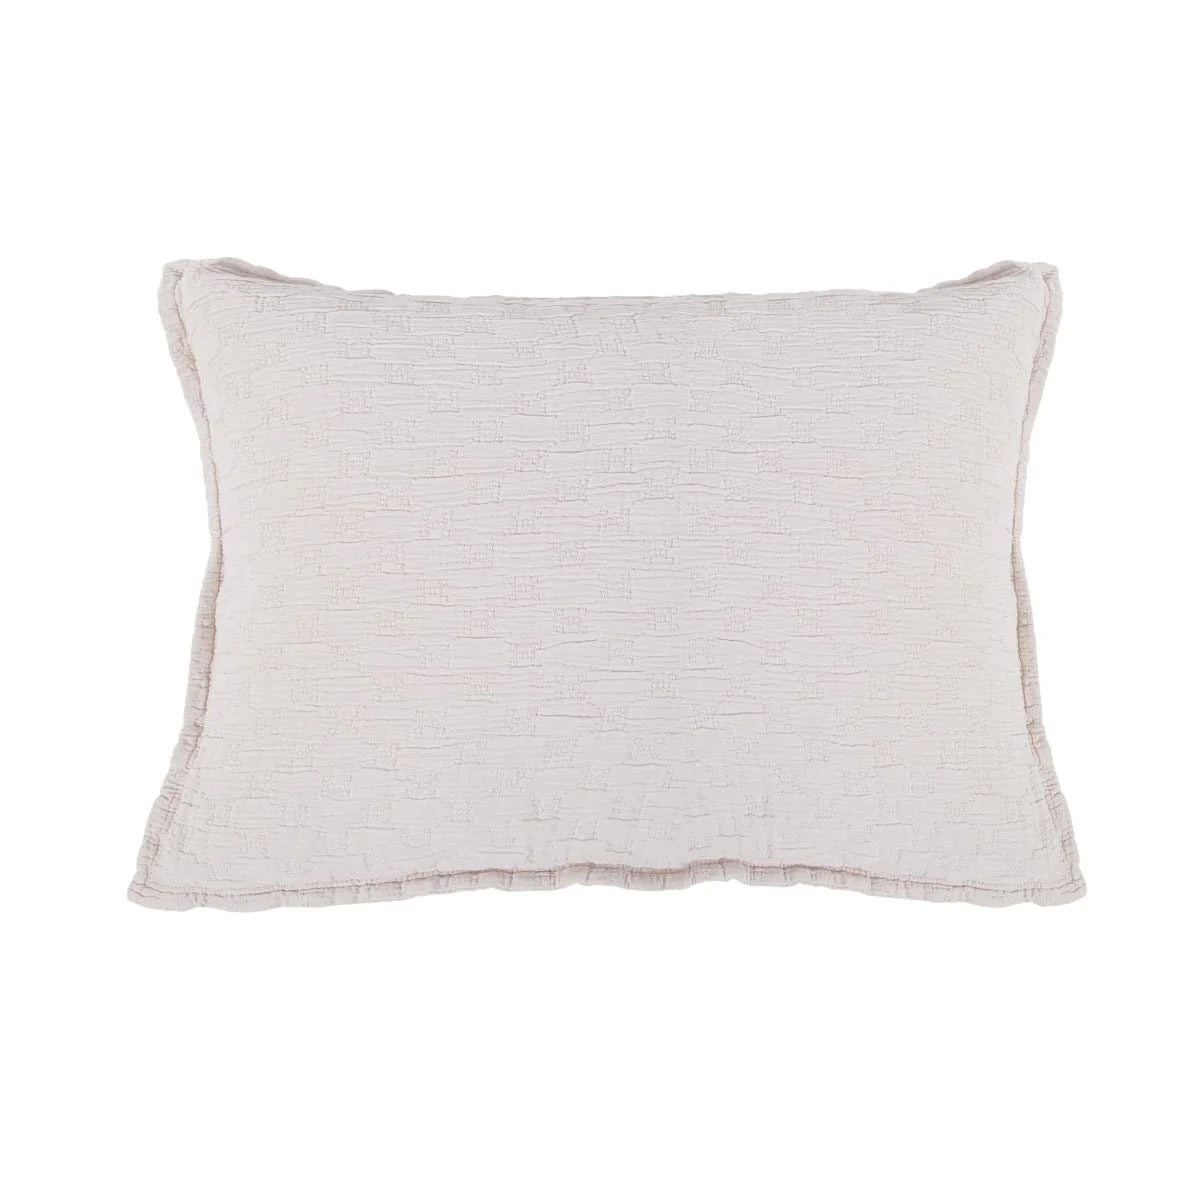 Crafted in Portugal, the Ojai matelasse by Pom Pom at Home is light and casual, bringing comfort with its subtle diamond pattern. The coziest bedding to climb into after a long day.  King lounger 100% cotton. Amethyst Home provides interior design, new home construction design consulting, vintage area rugs, and lighting in the Denver metro area.